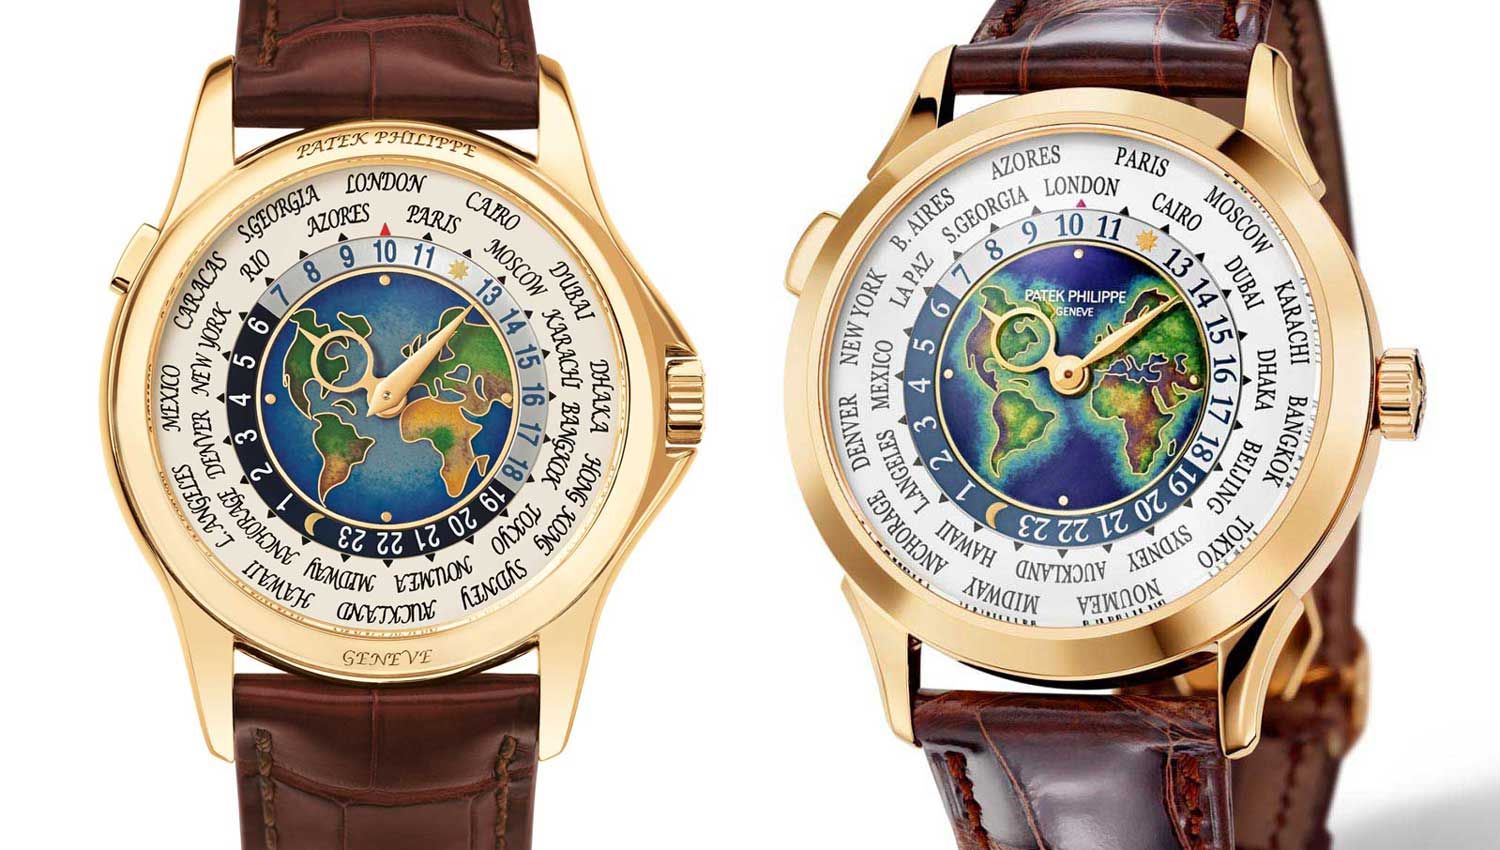 The Patek Philippe signature on the ref. 5231 (right) is painted onto the enamel surface, whereas in the previous ref. 5131 (left) the signature had been engraved onto the bezel, which was somewhat controversially received. The 5231 also has a larger flat bezel along with faceted lugs that are reminiscent of the 2523.